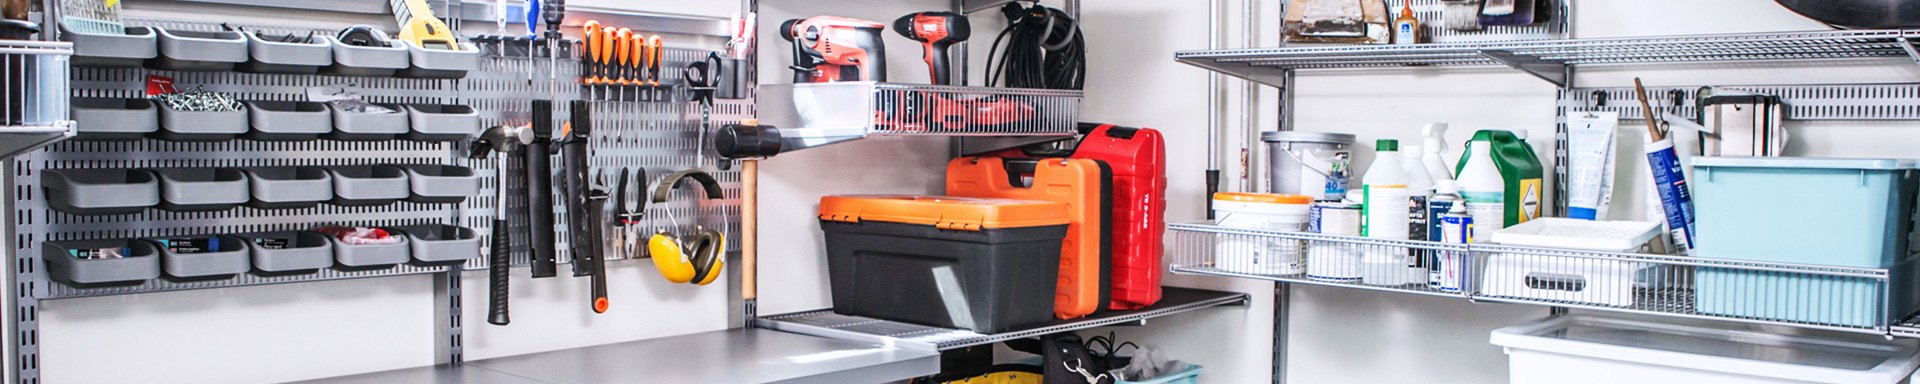 Equipment Storage Systems | Racks, Stands, Ladders - TOOLSiD.com